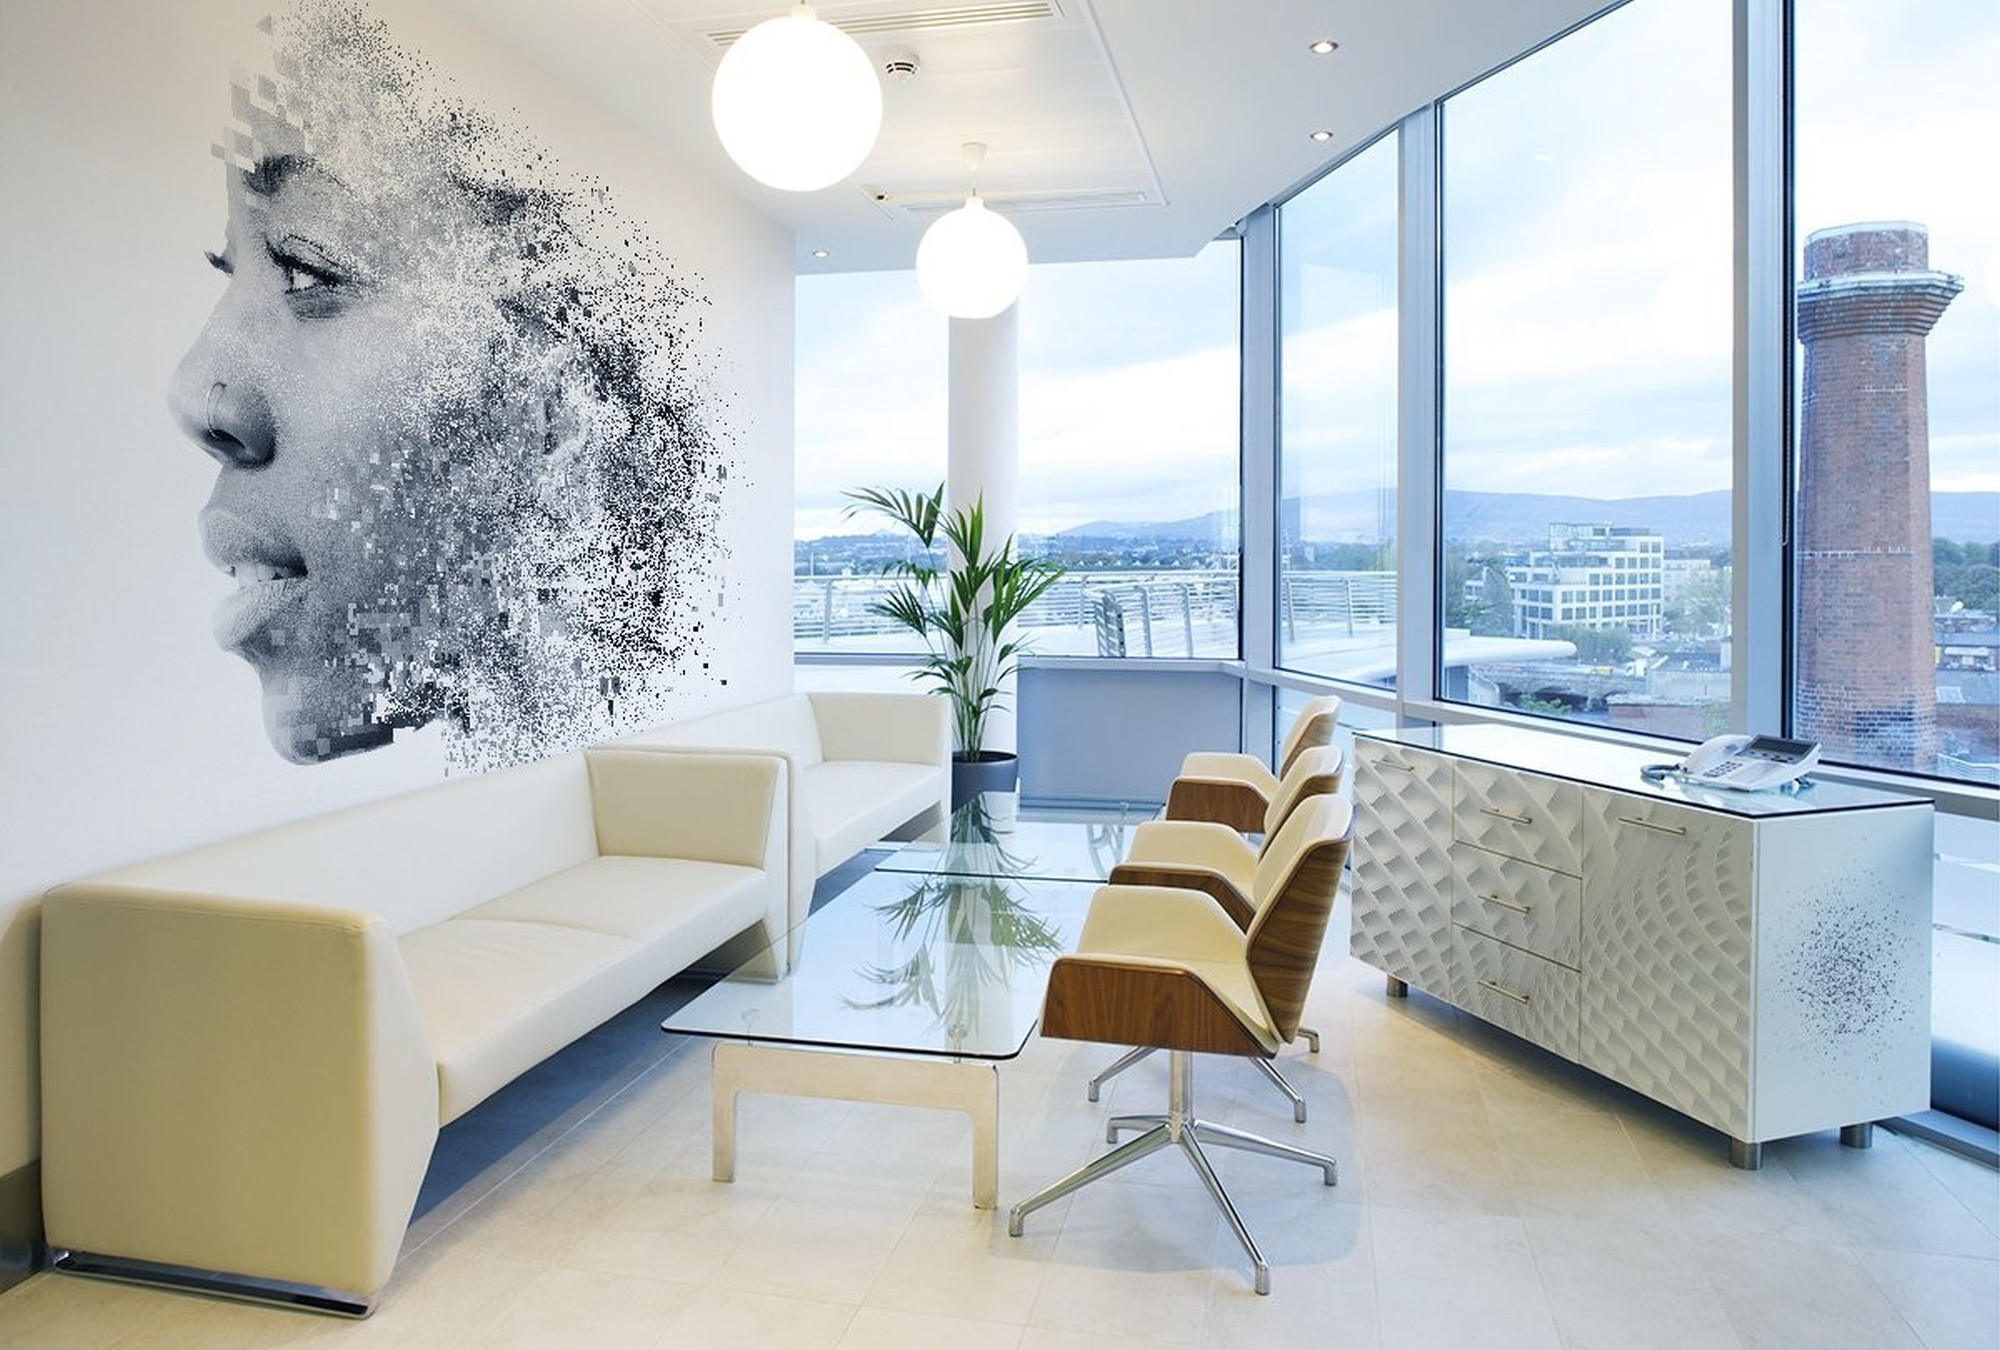 Face dispersion • Futuristic - Living room - Abstraction - People - Wall Murals - Stickers